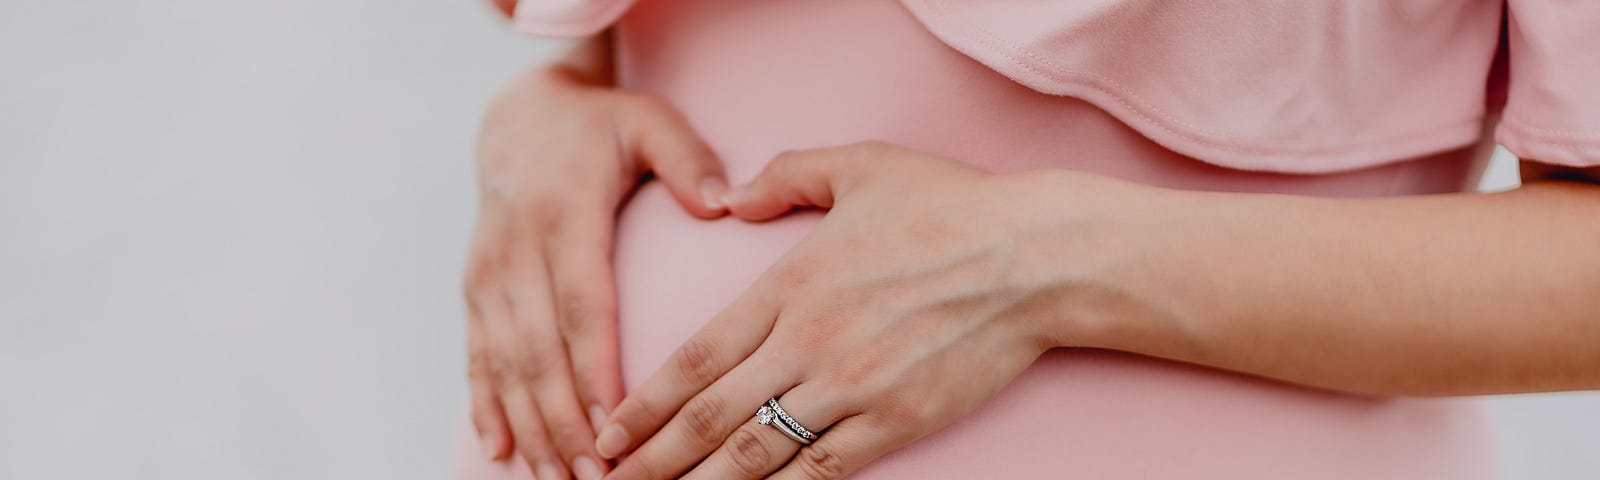 Pregnant woman’s hands on her belly